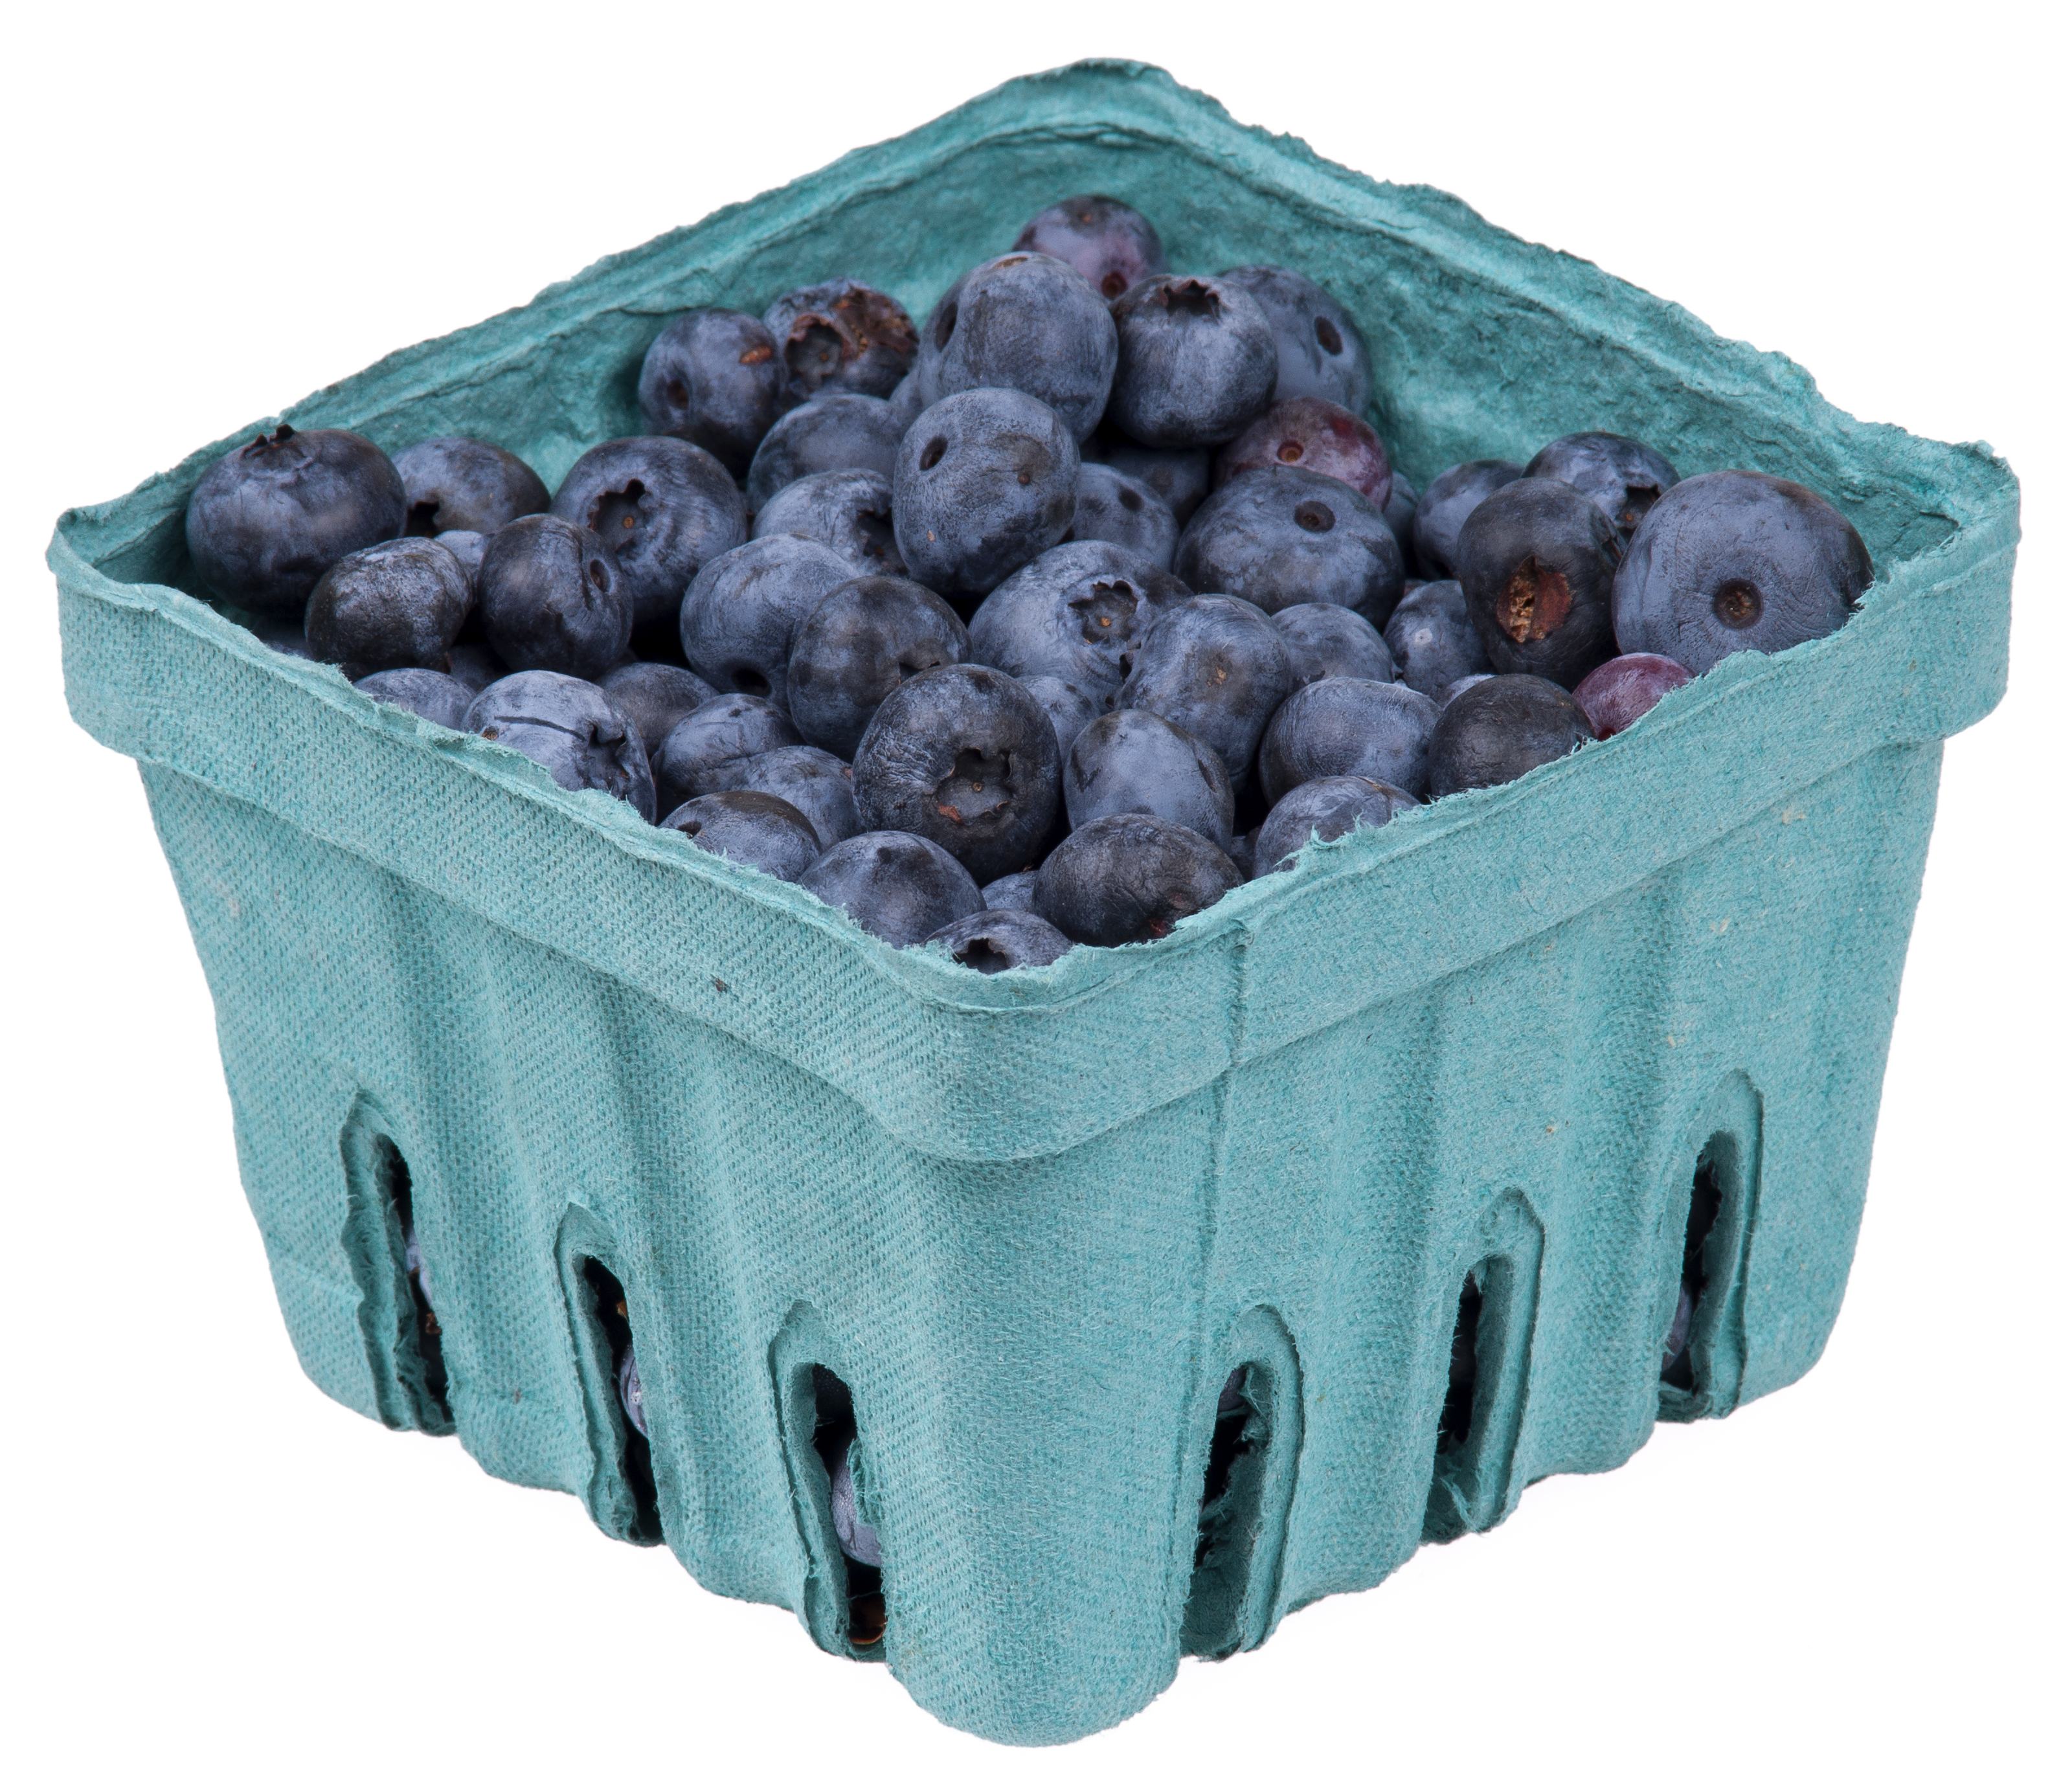 Blueberry clipart blueberry basket. File blueberries in pack